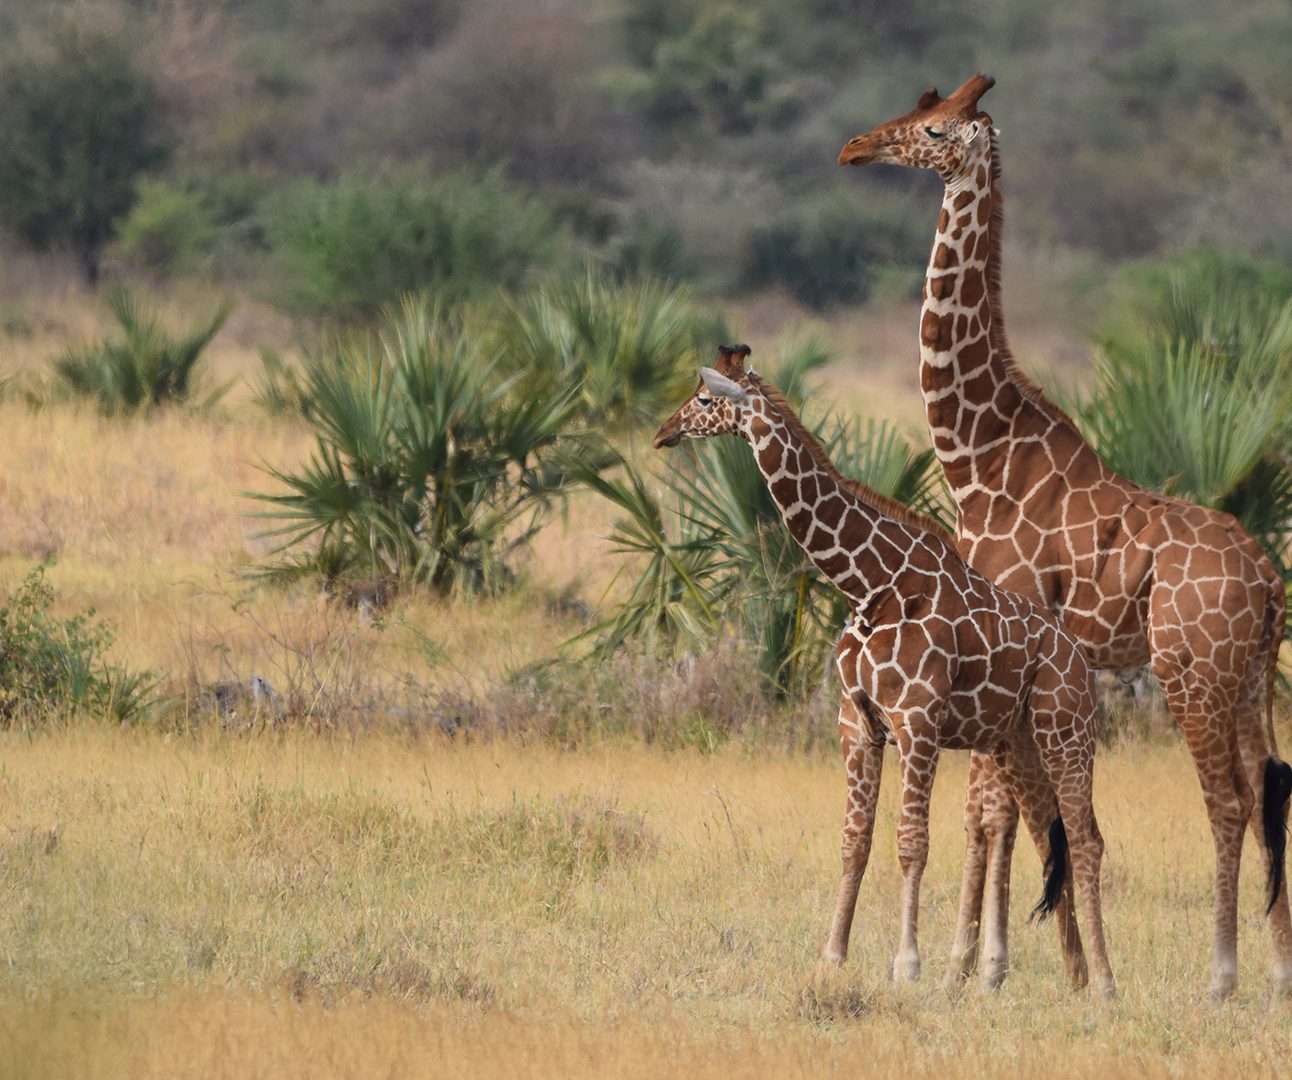 A group of three giraffes standing in the African bush